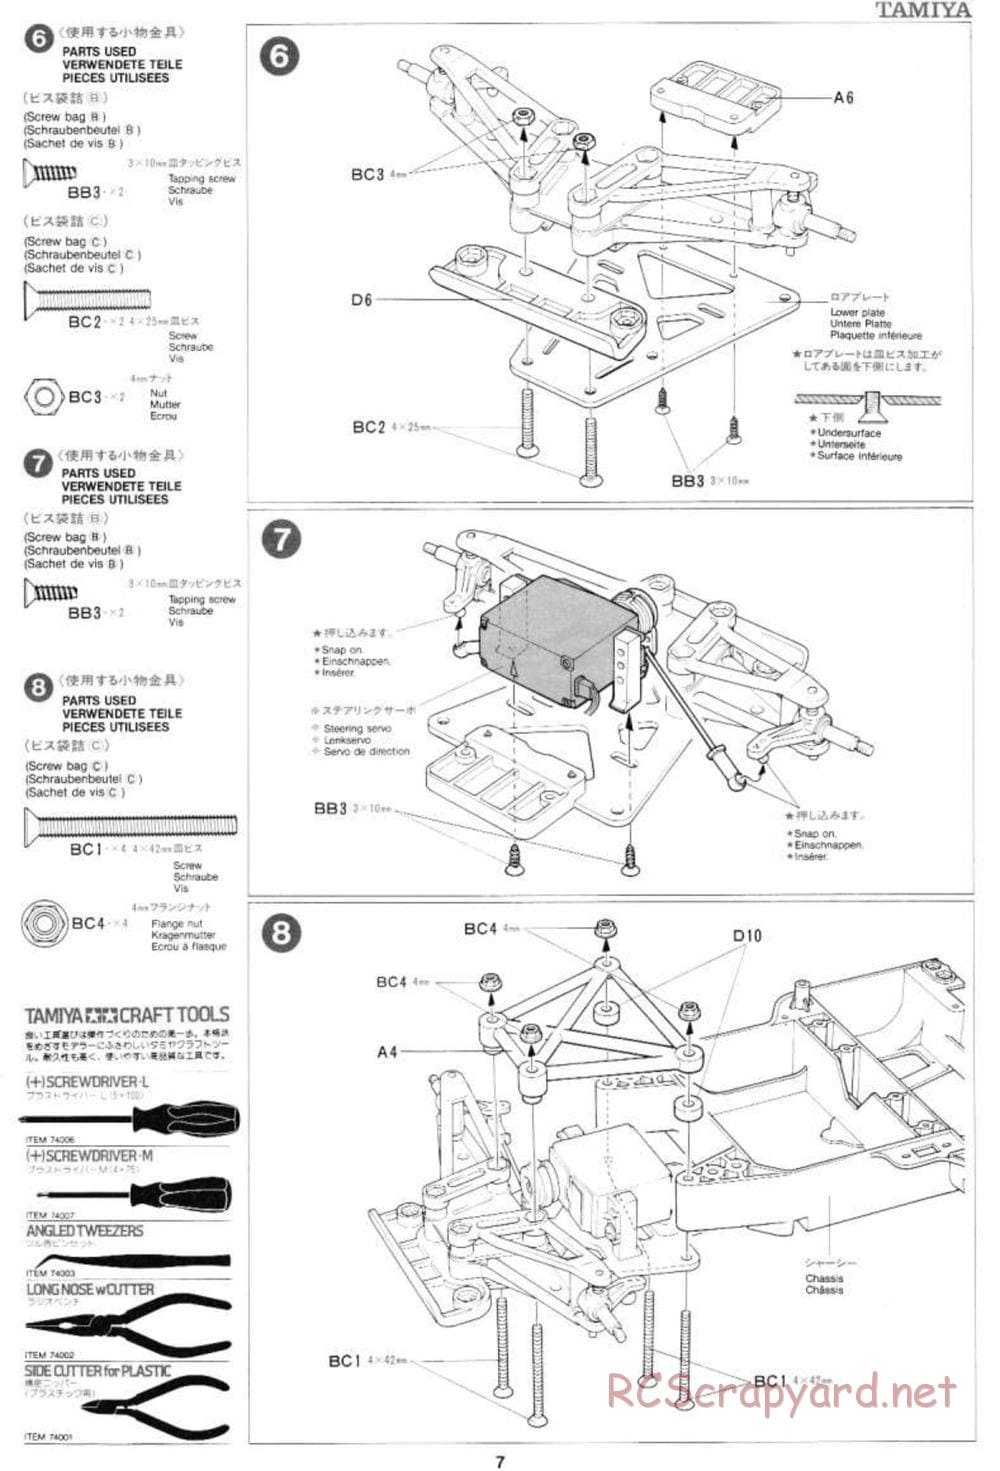 Tamiya - Mercedes-Benz C11 - Group-C Chassis - Manual - Page 7